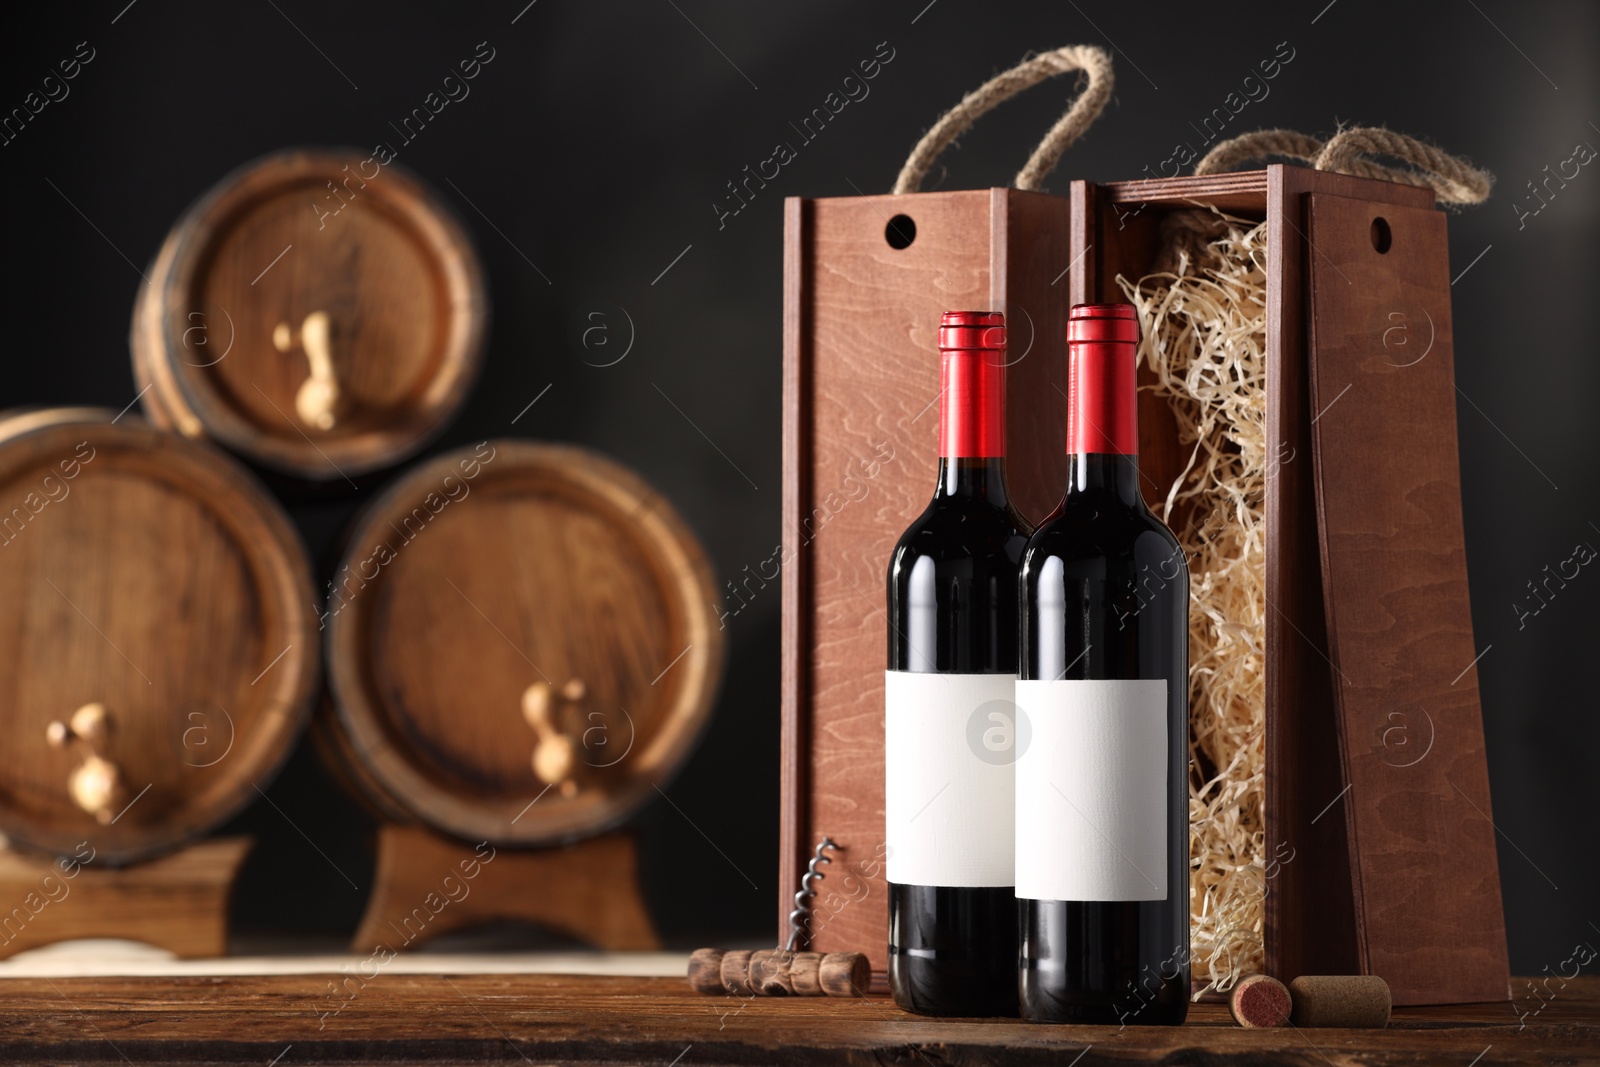 Photo of Wooden boxes, corkscrew and wine bottles on table against dark background. Space for text